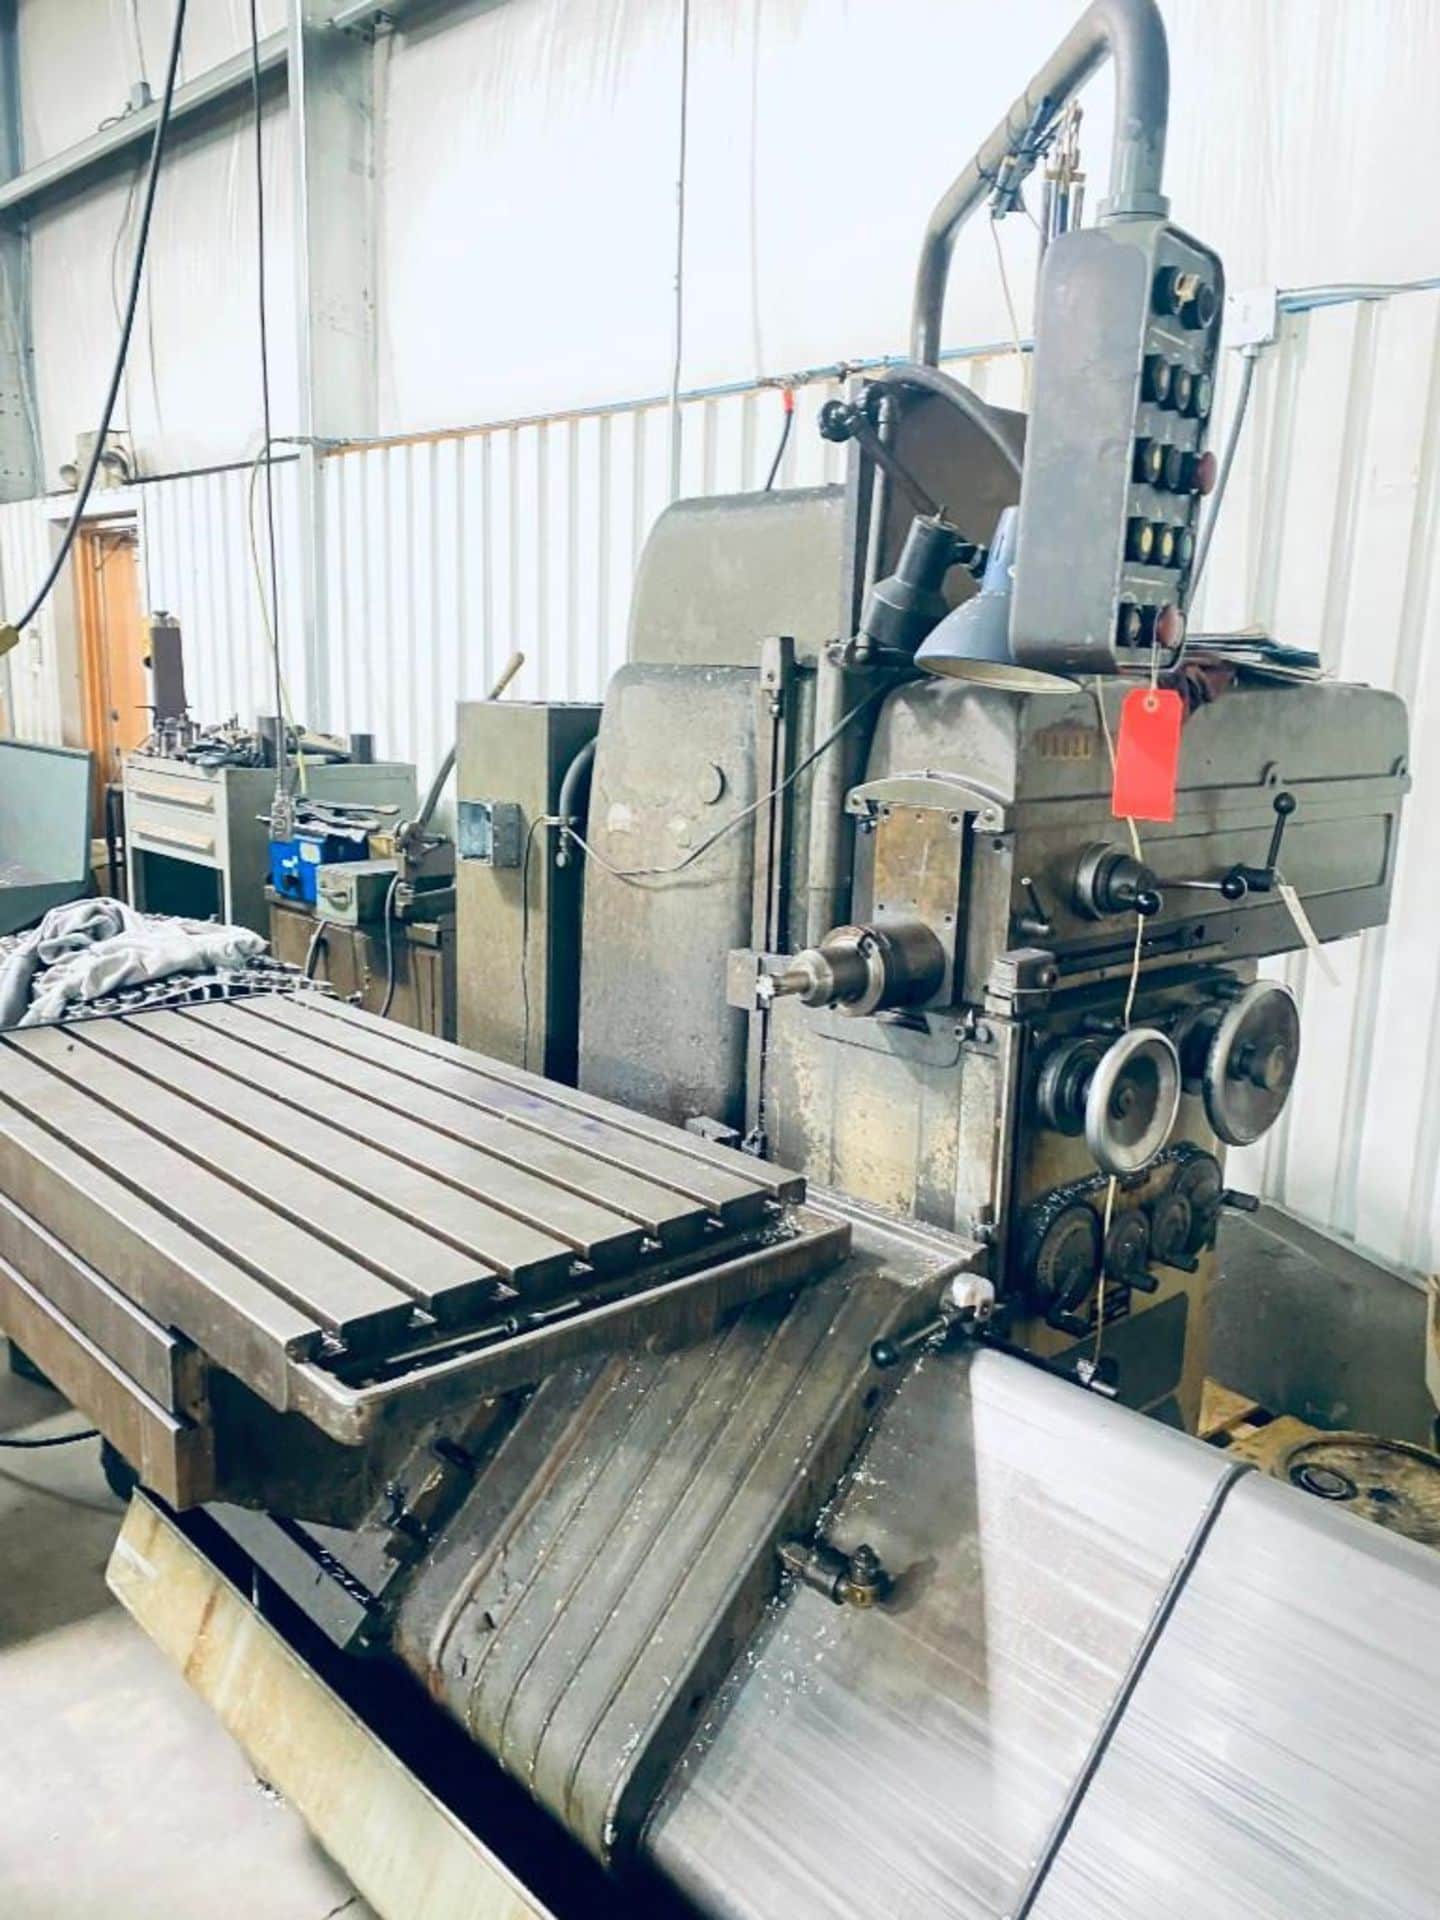 friedrich deckel horizontal milling machine with tooling and attachments